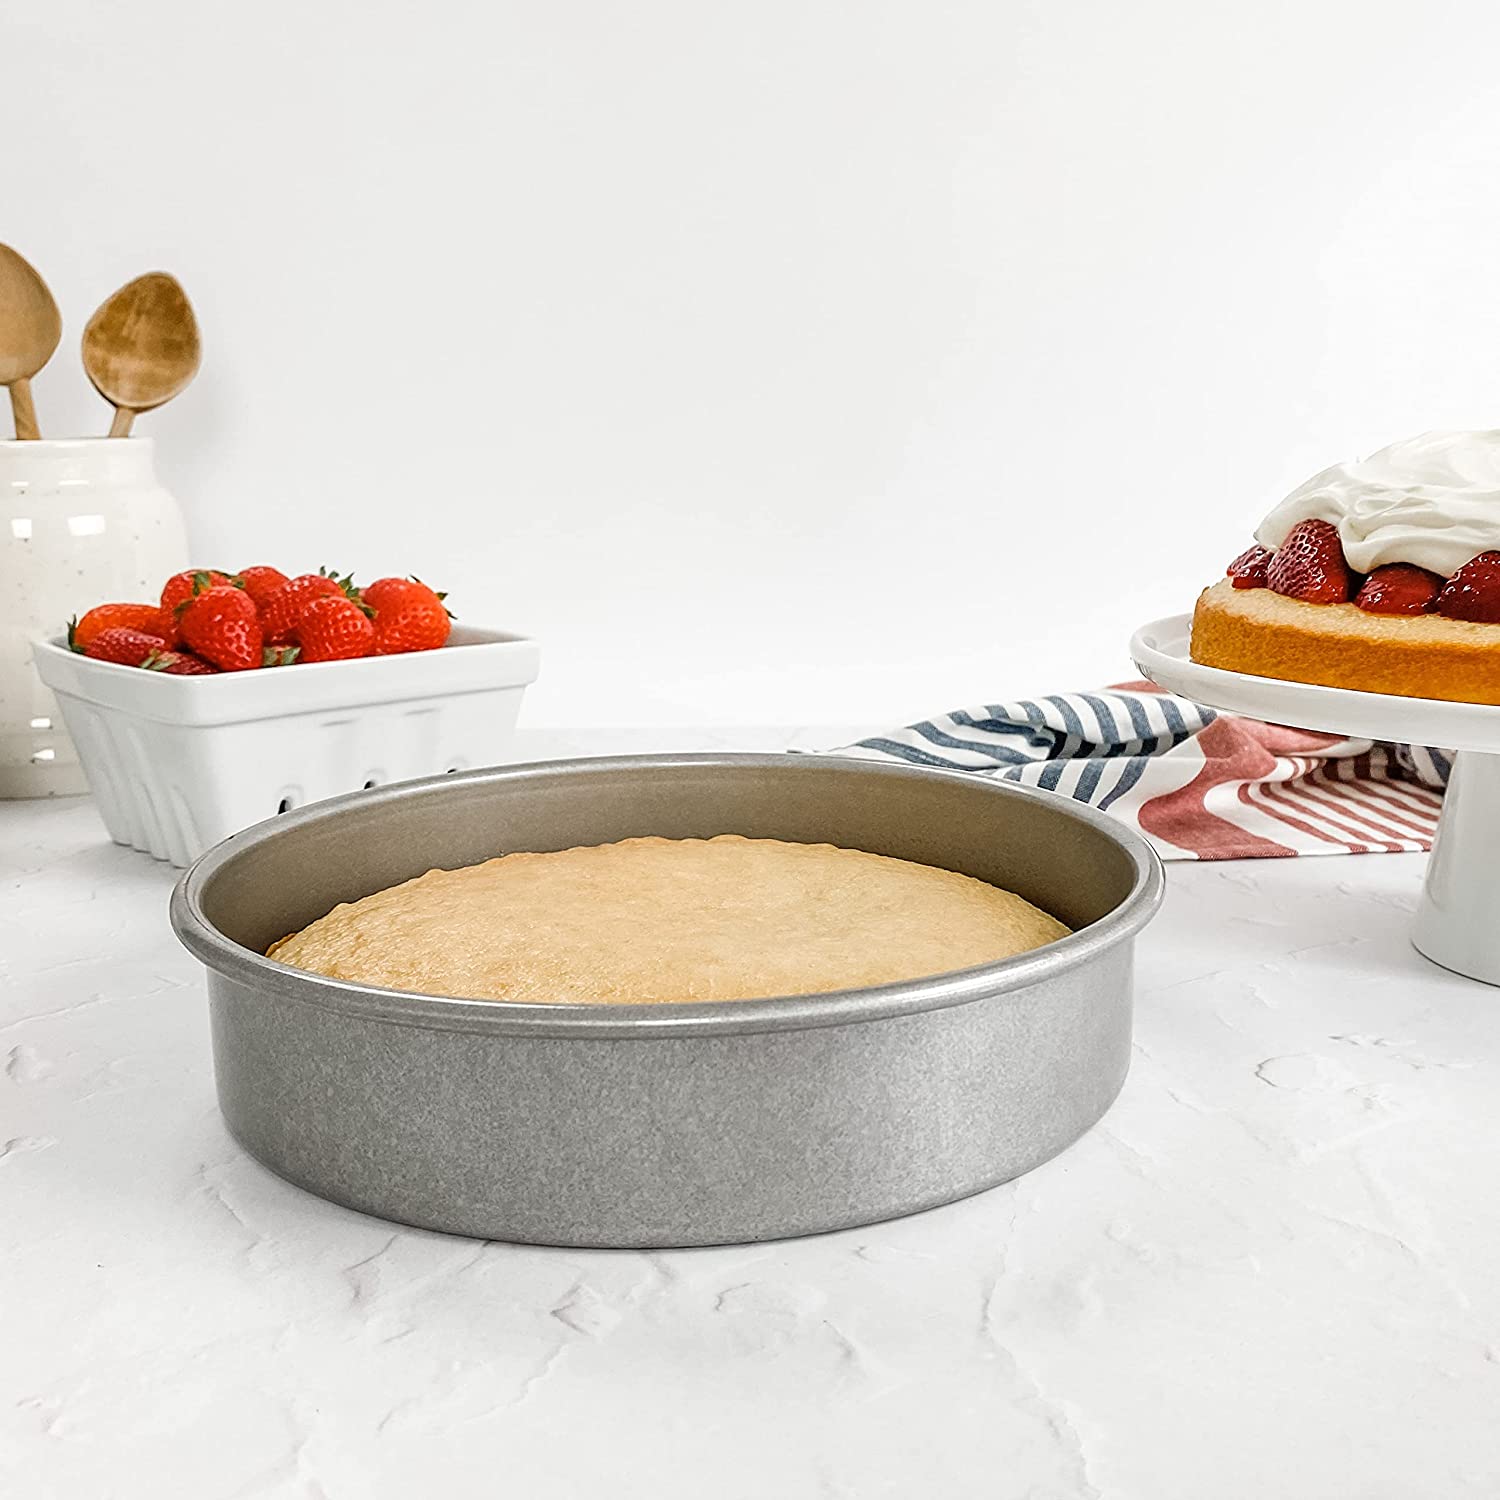 The Top 8 Cake Pans to Purchase